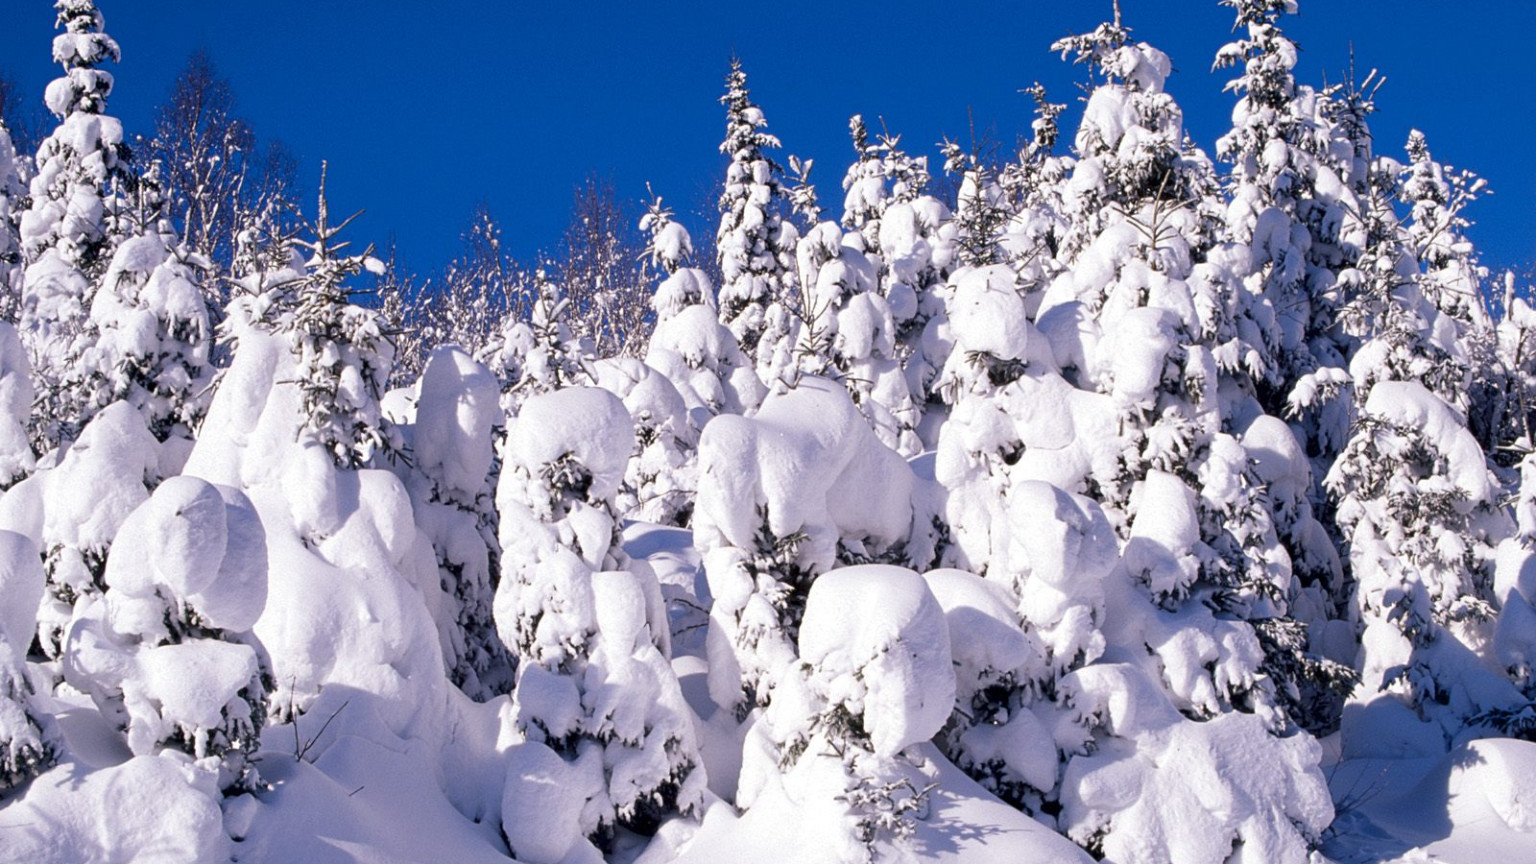 Spruce Trees Covered in Snow, Canada.jpg